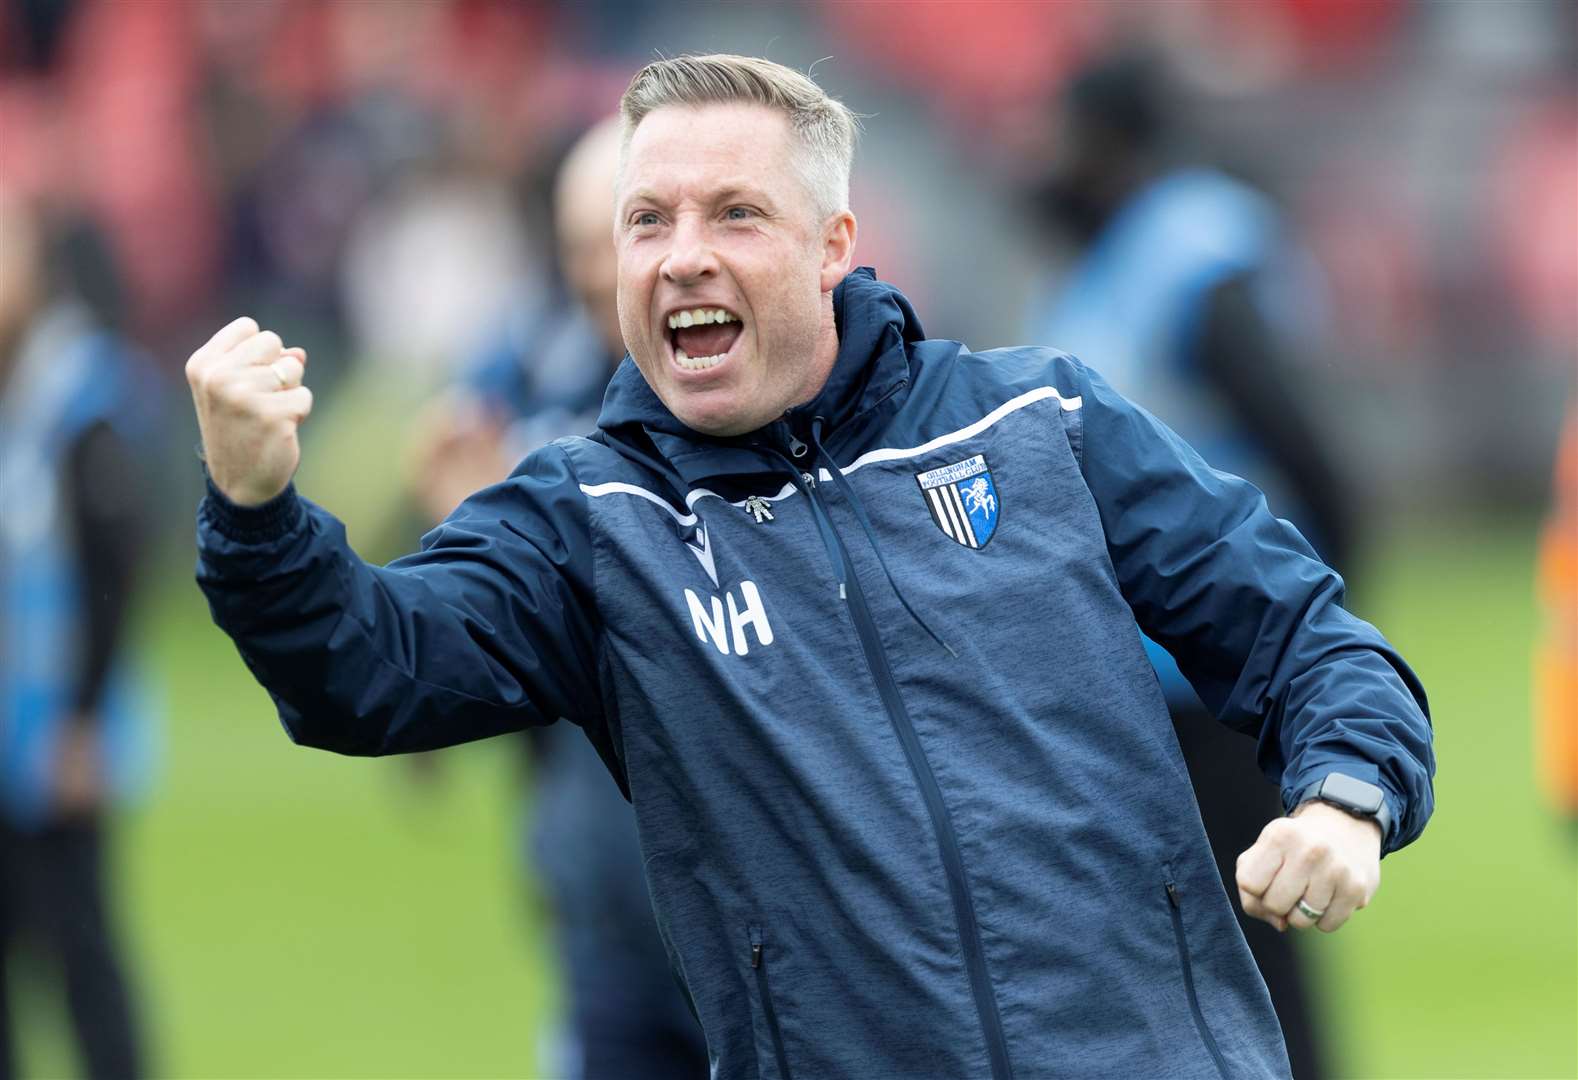 Gillingham manager Neil Harris is looking forward to the fixtures being released on Thursday